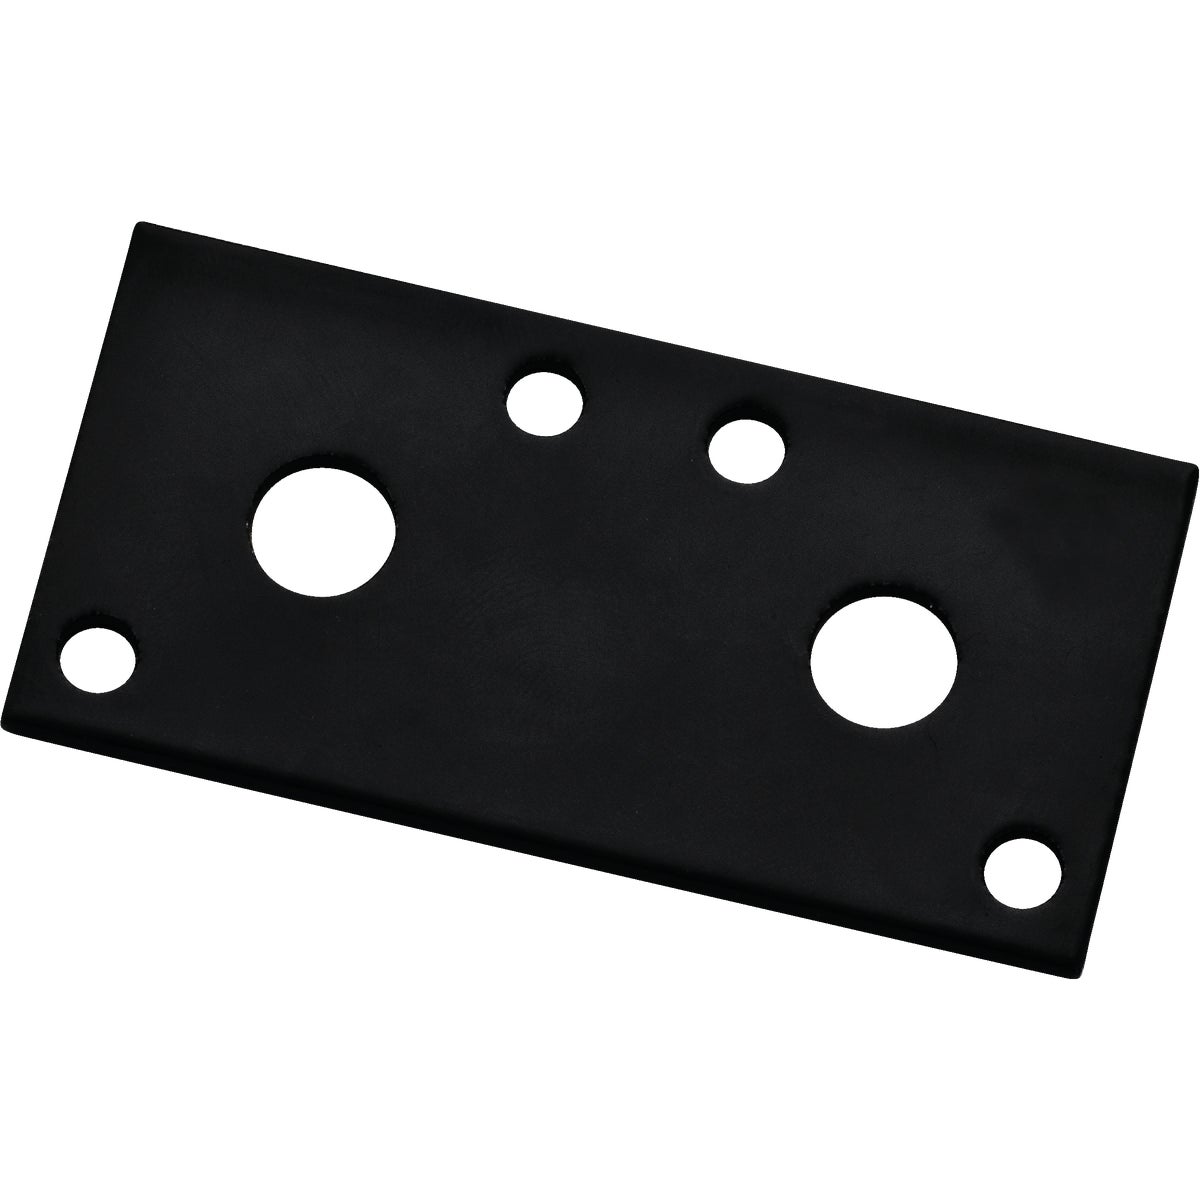 National Catalog 1182BC 3 In. x 1.3 In. Black Heavy Duty Mending Plate